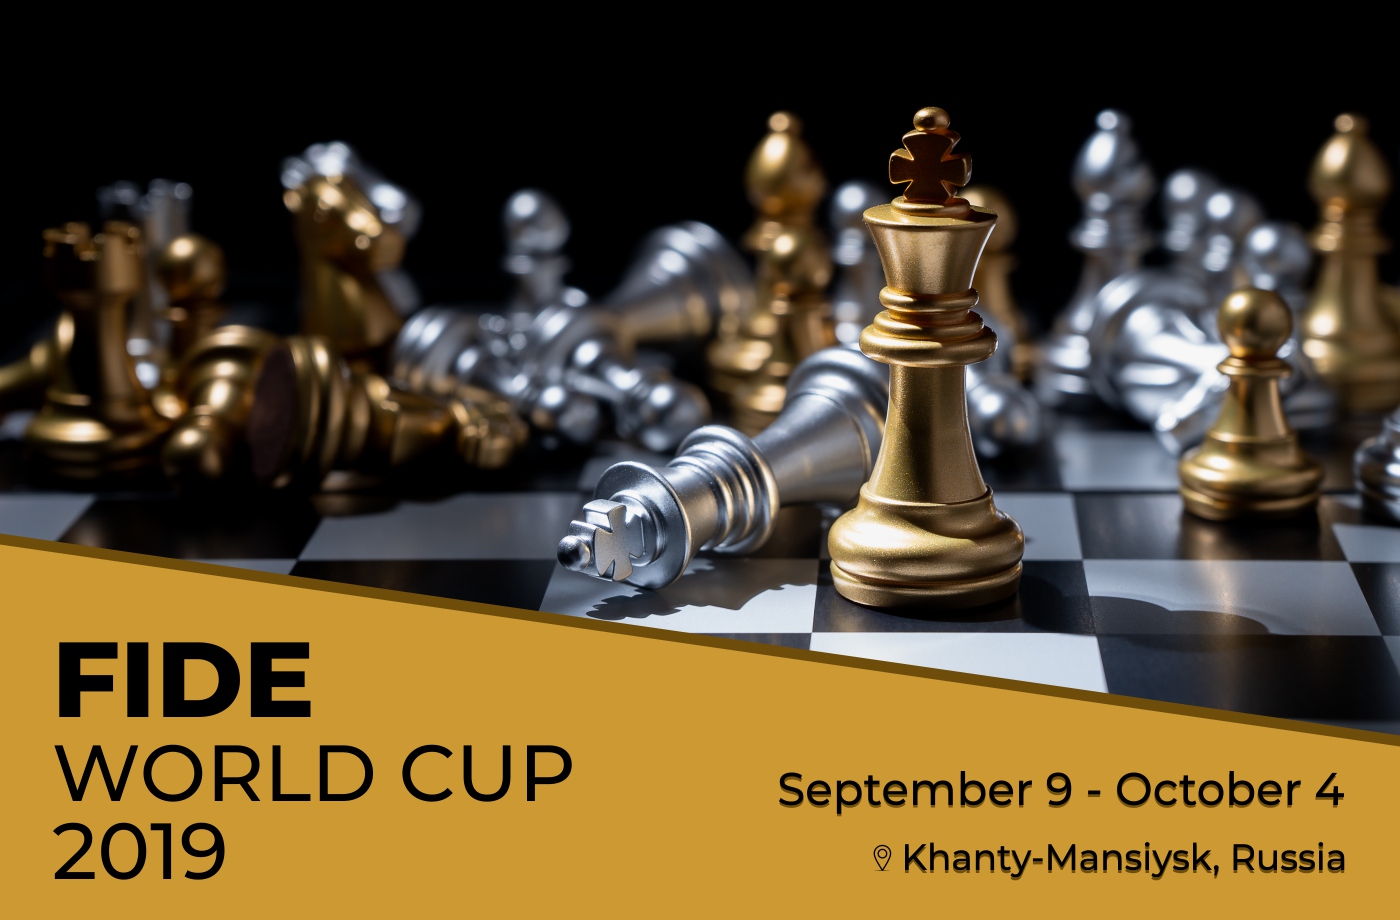 Chess World Cup 2019